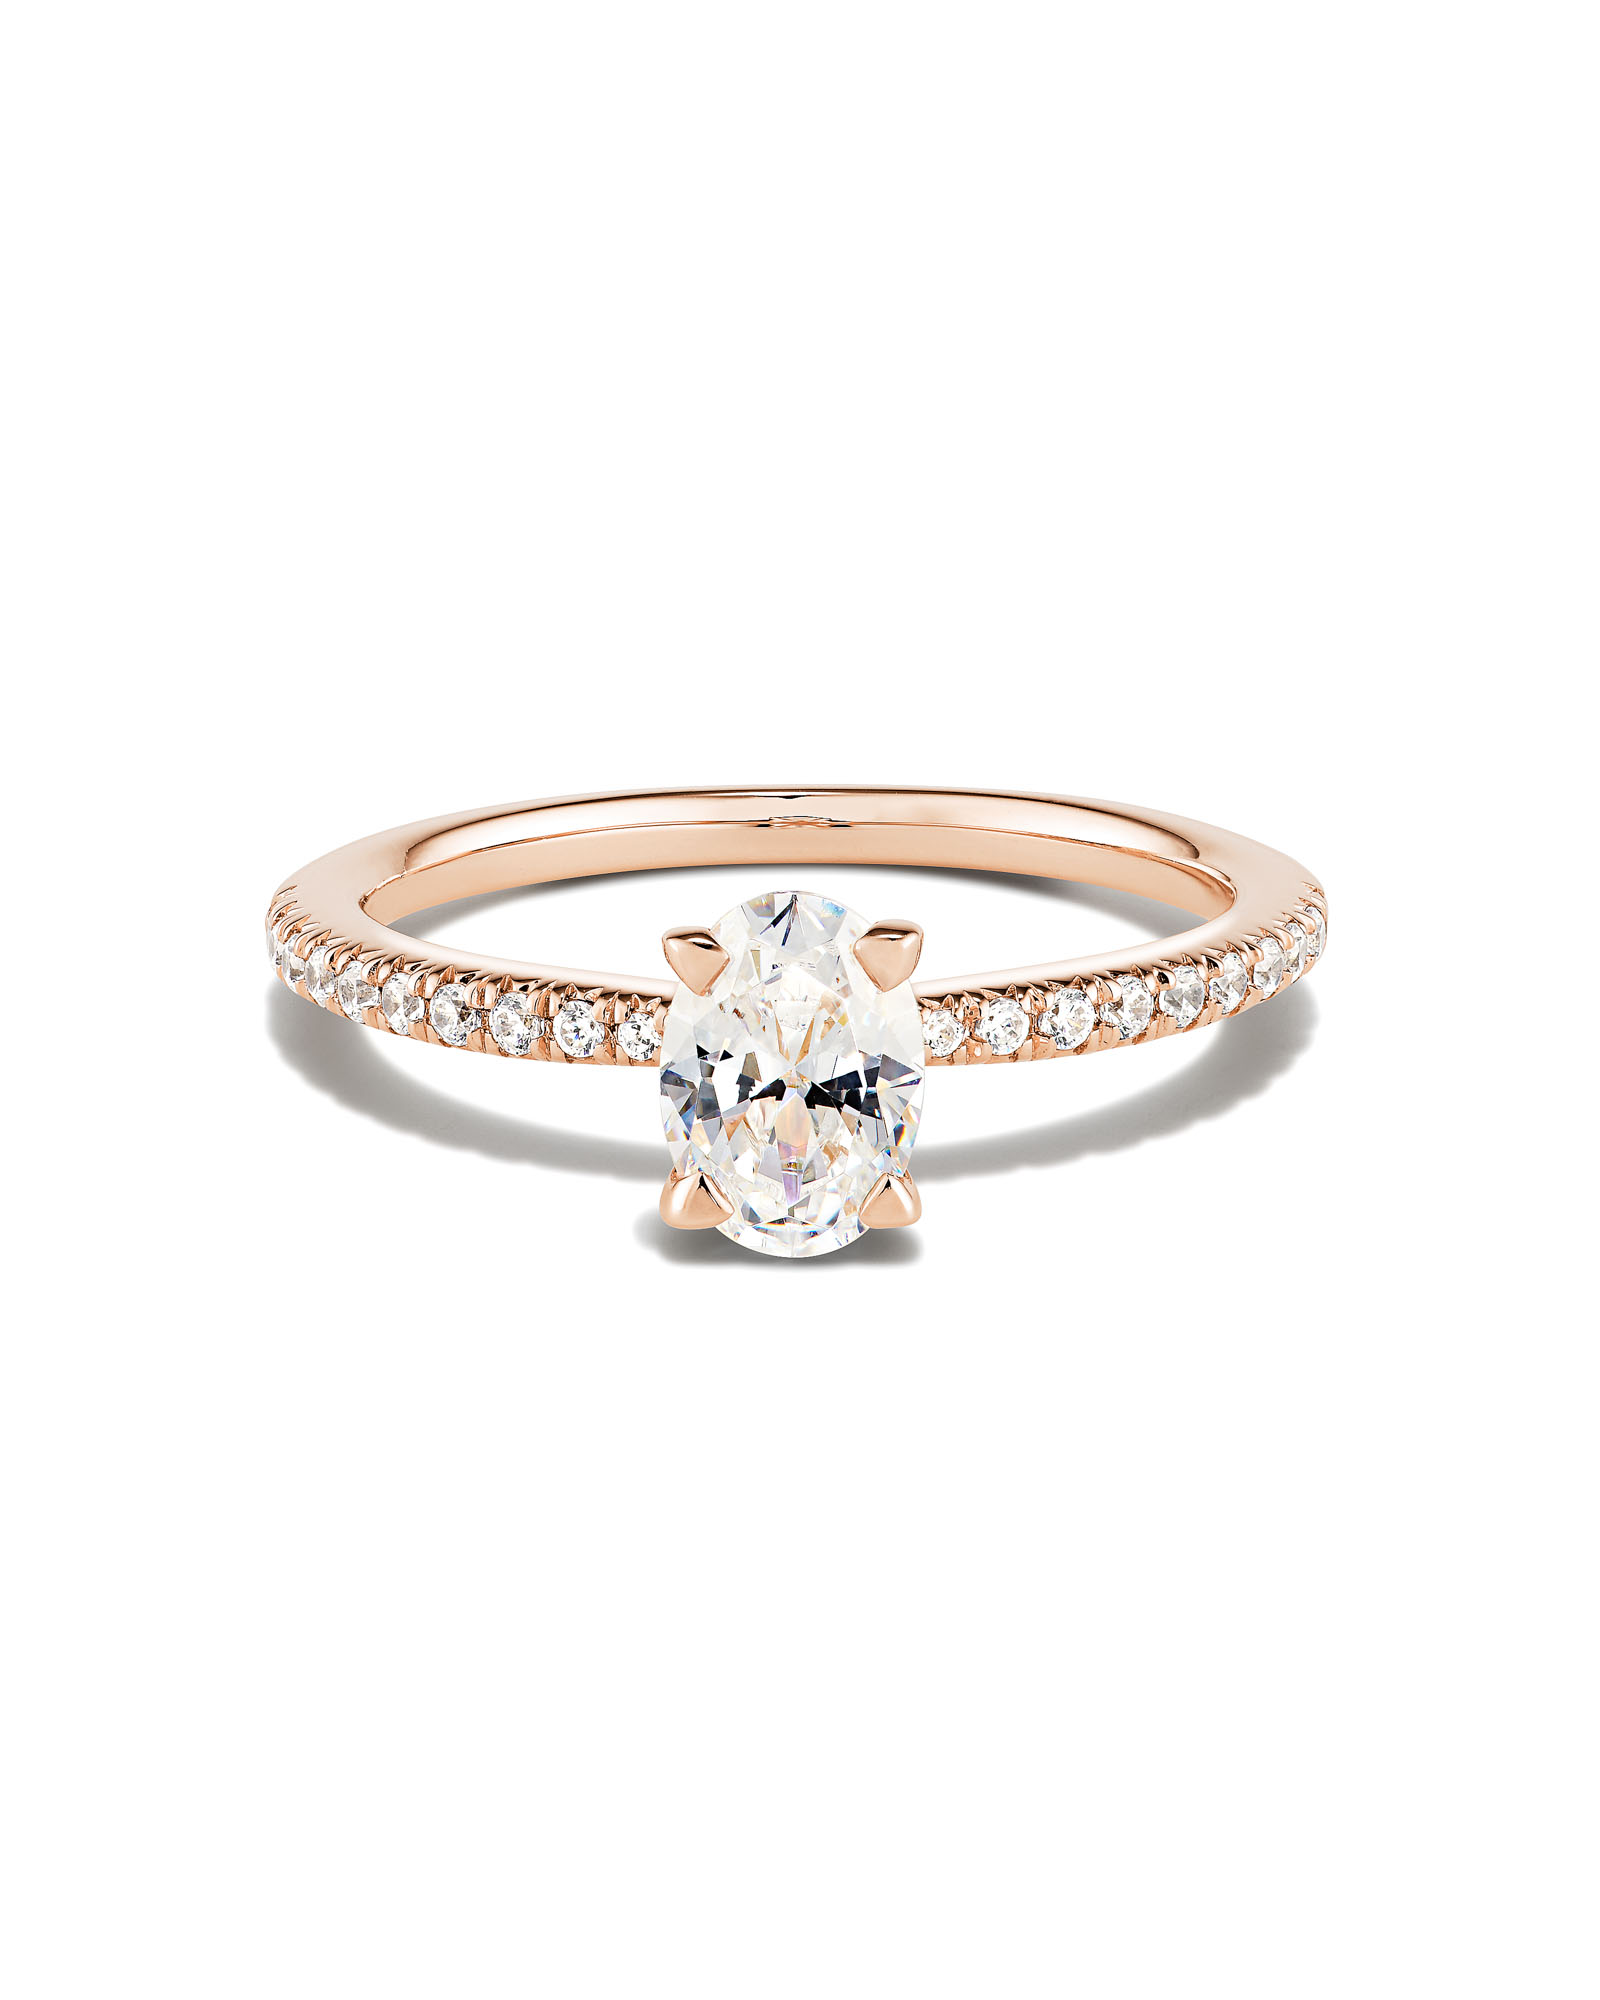 Oval Cut Engagement Rings - Laings